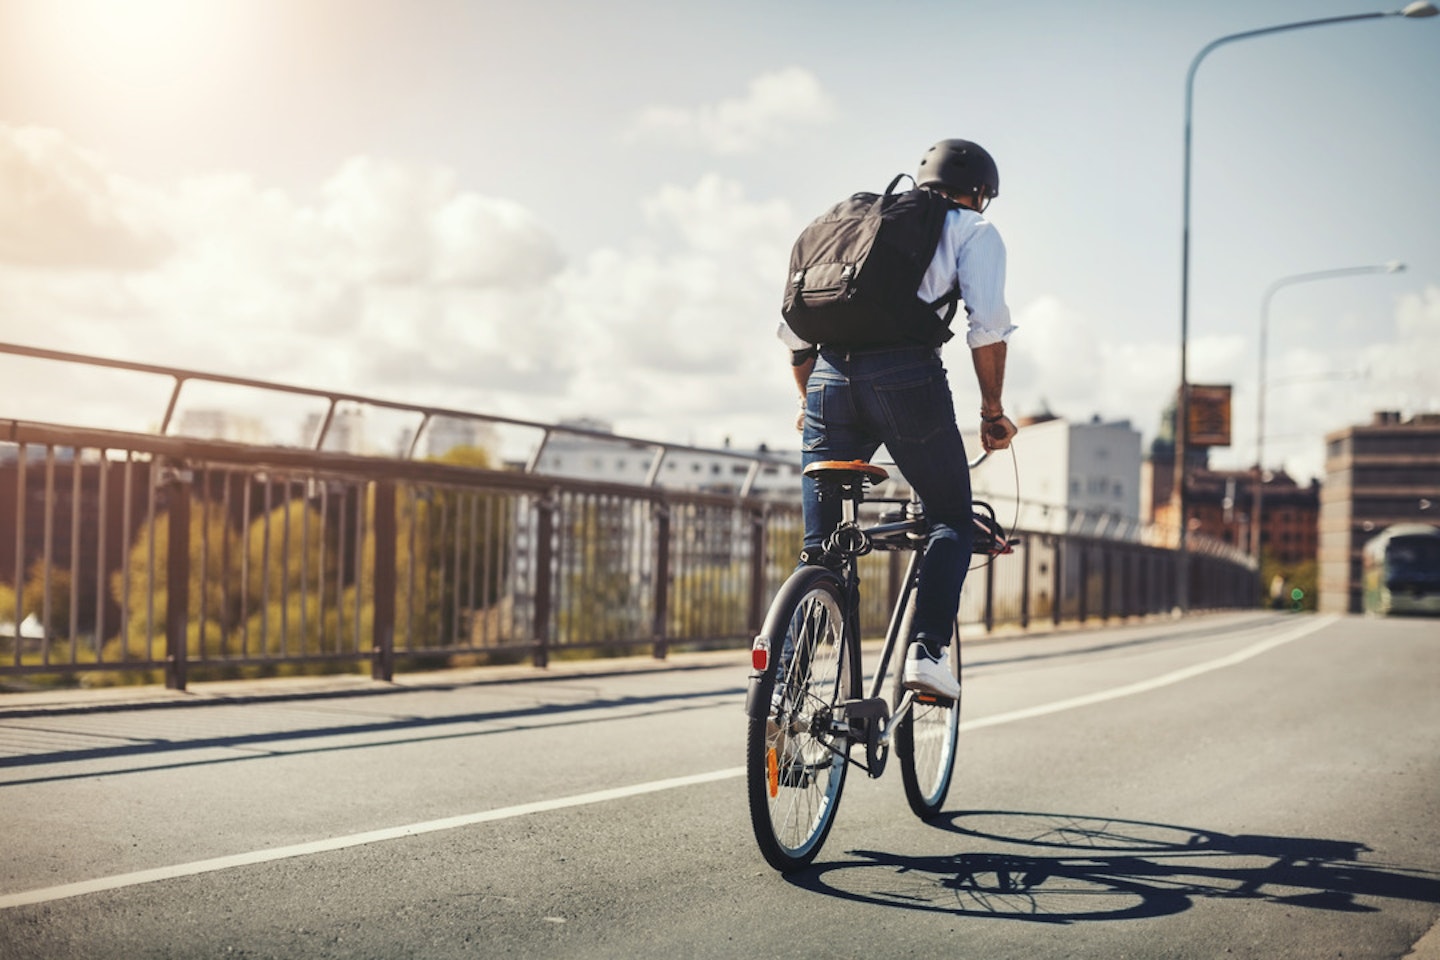 Man commuting on a bicycle with backpack on